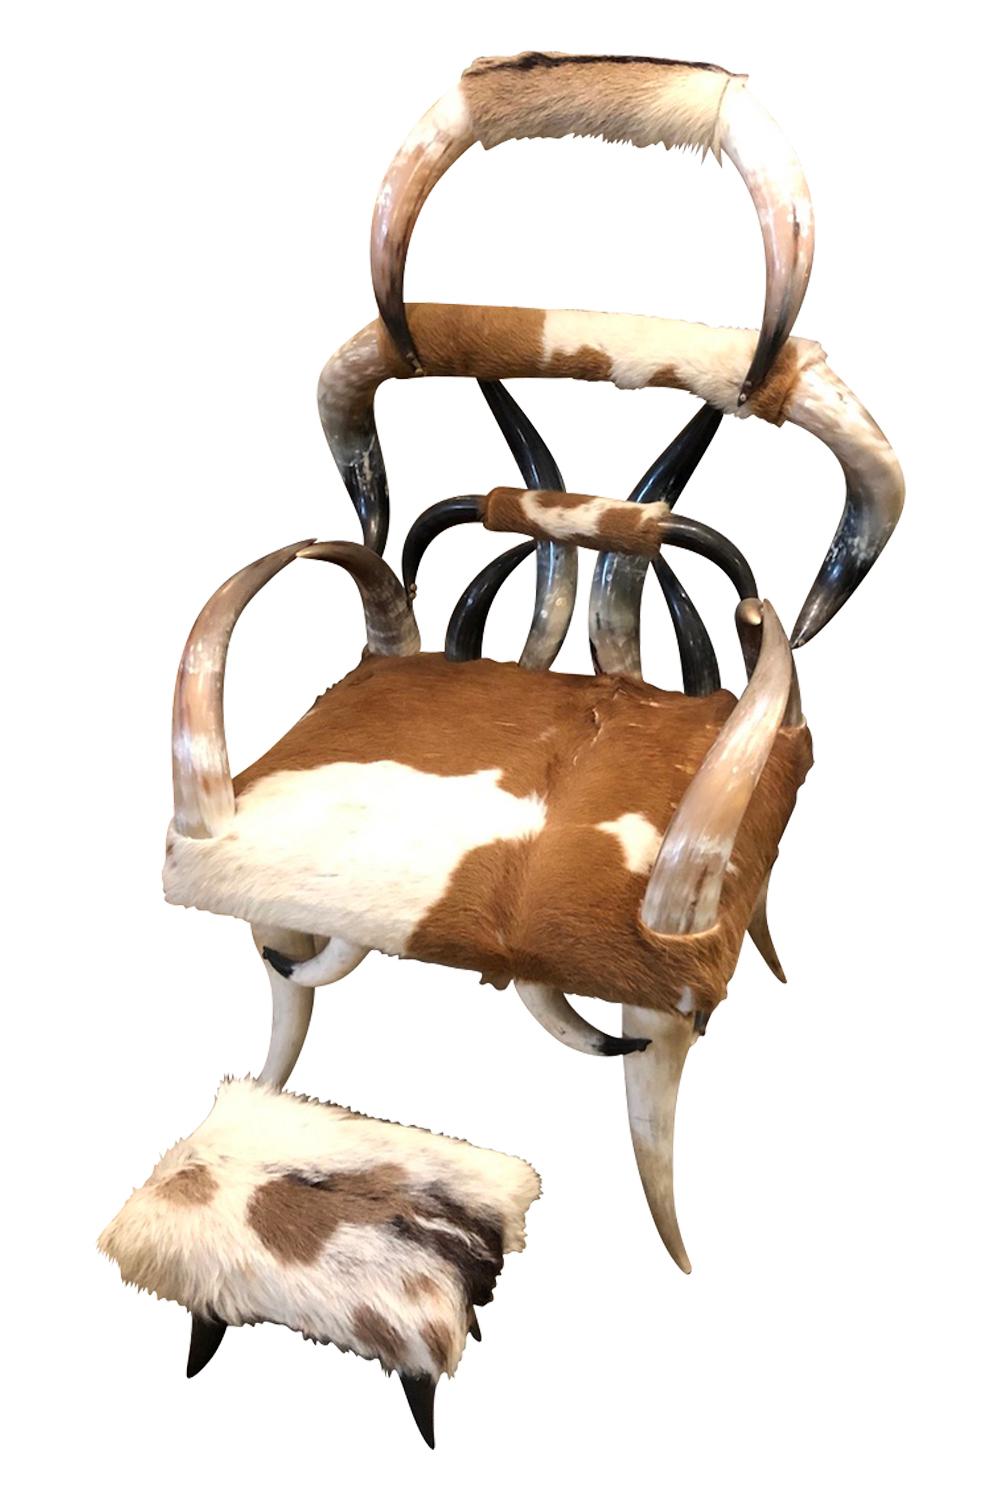 Vintage Texas Long Horn Rustic Arm Chair and Ottoman, Circa 1960
upholstered in a brown and white cowhide